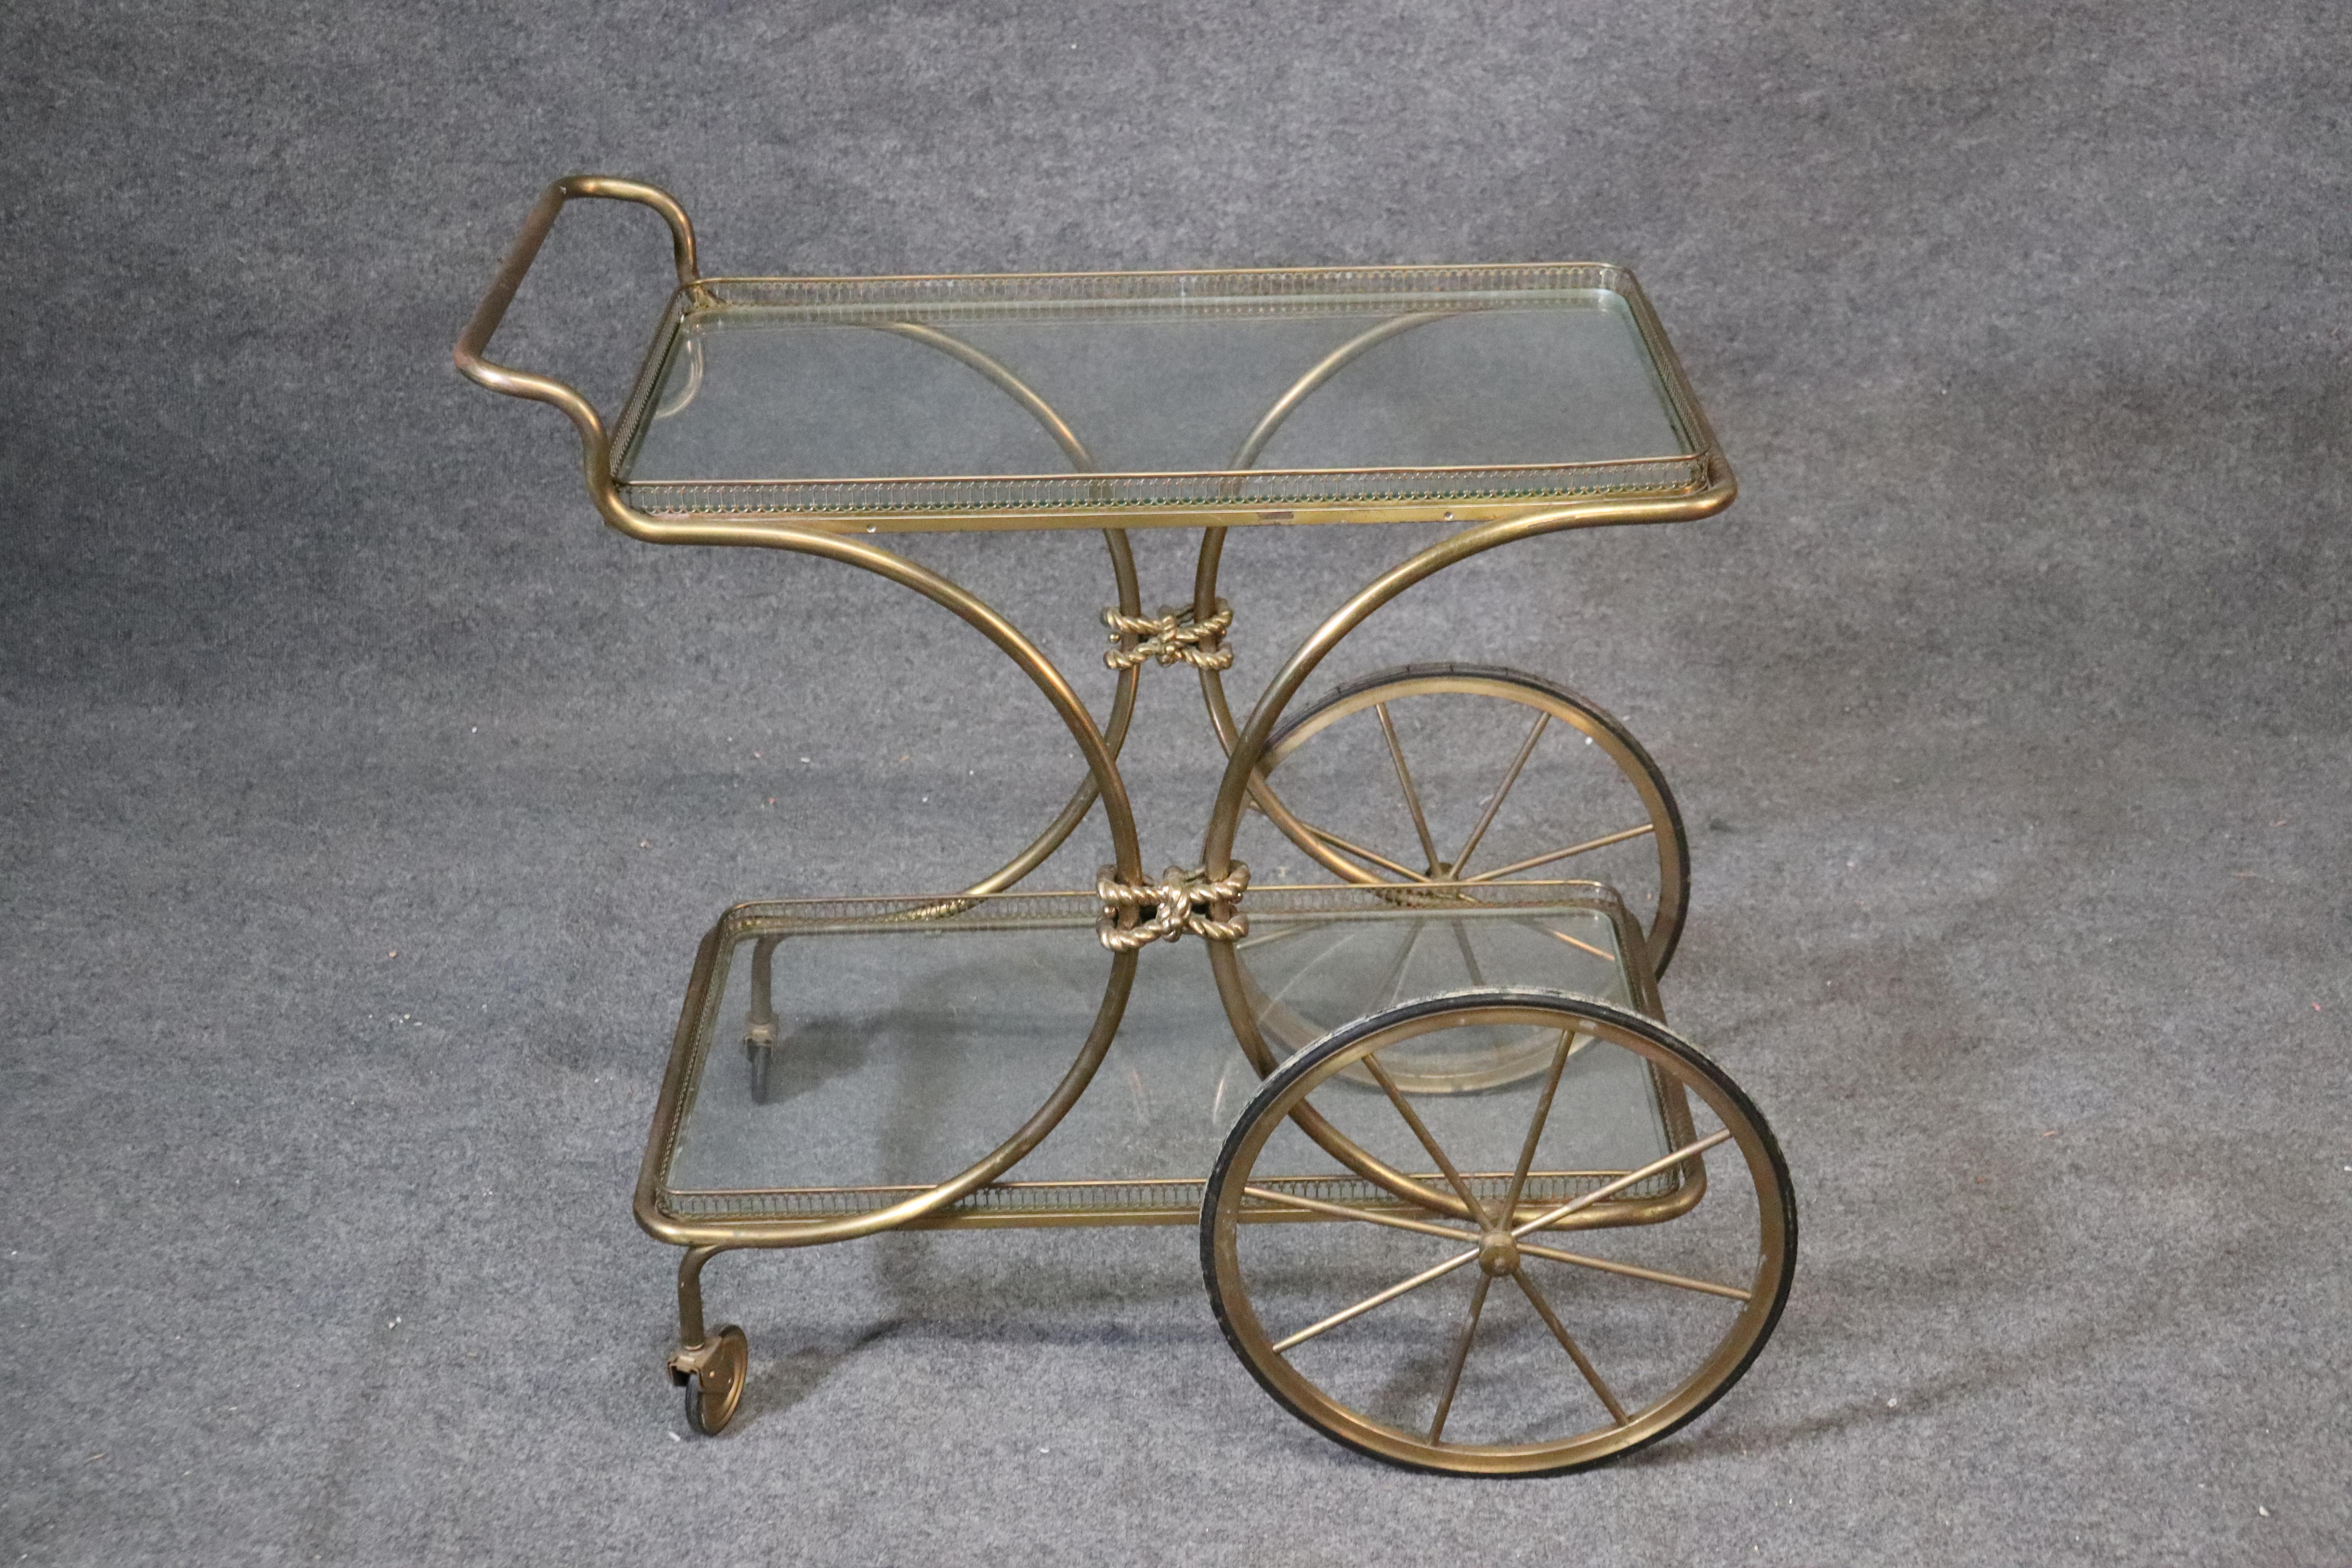 This is a fantastic tea trolley in genuine gold leaf. The trolley can be used as a liquor cart or dessert cart or simply as a tea trolley. The cart measures 31 tall x 31 wide x 20 deep. The cart dates to the 1950s era and is Italian.